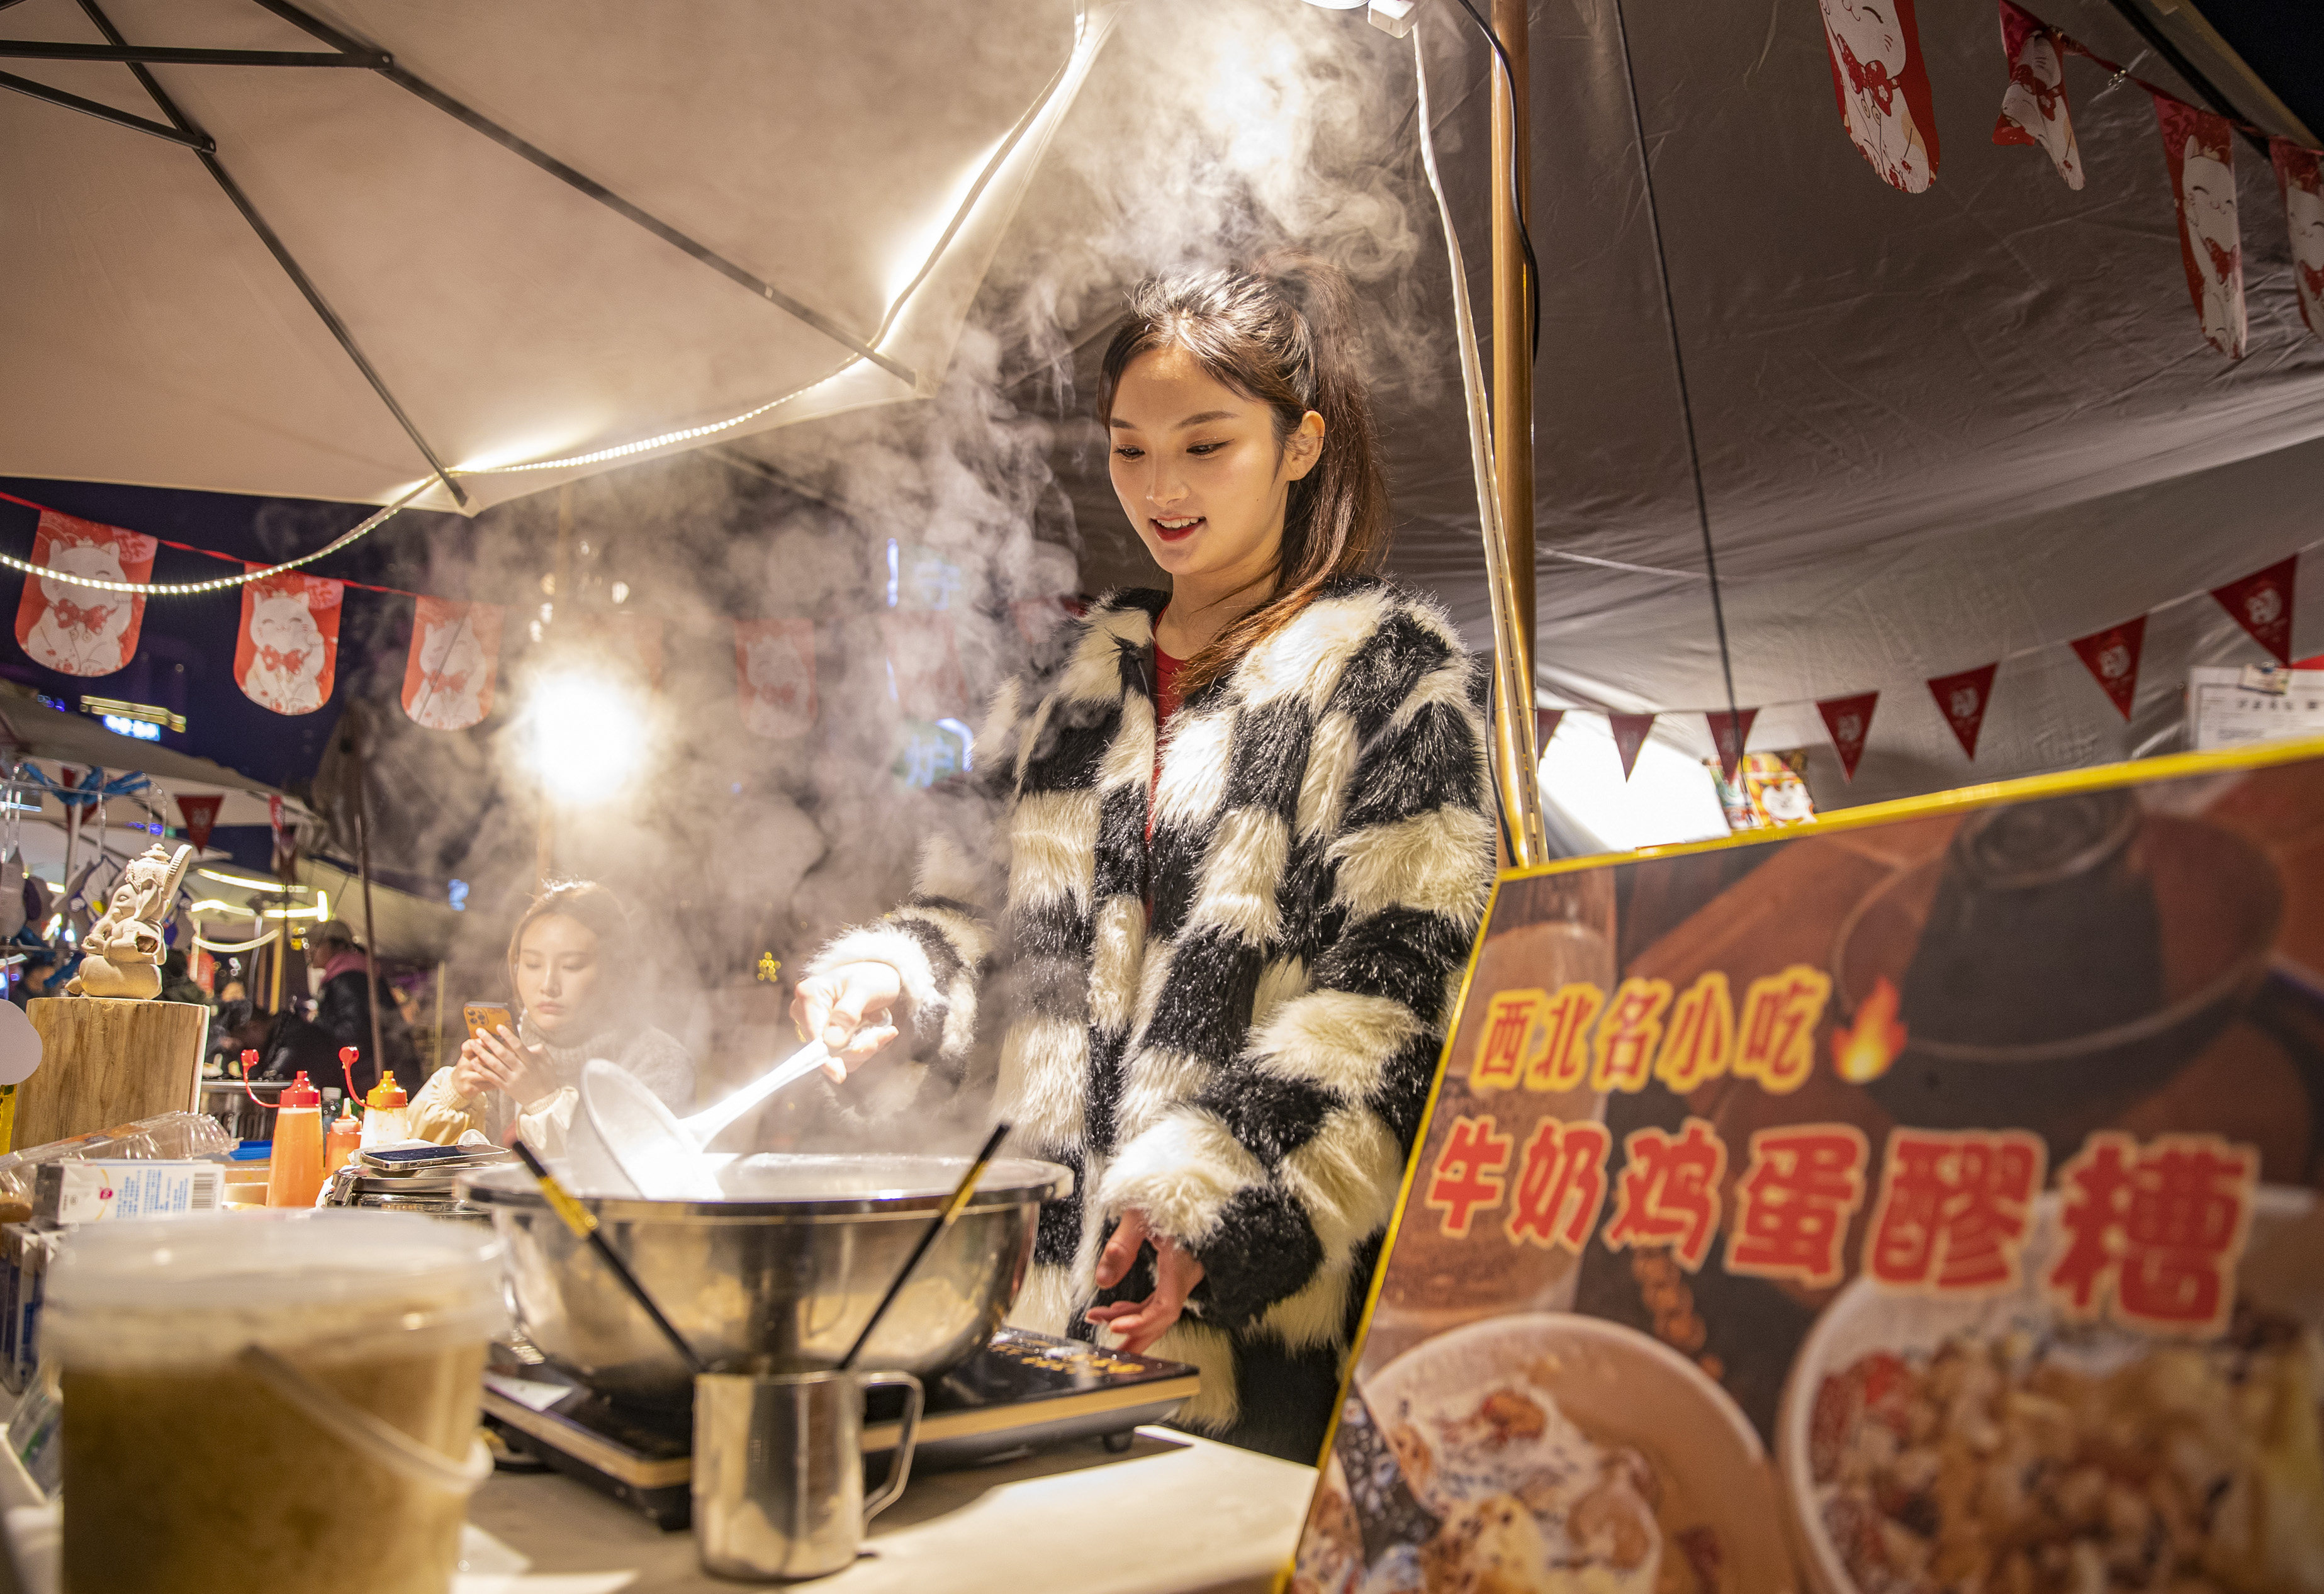 A young vendor cooks at a street stall in China’s Chongqing municipality, which has implemented a variety of nighttime activities this year to boost the so-called night economy. Photo: Xinhua